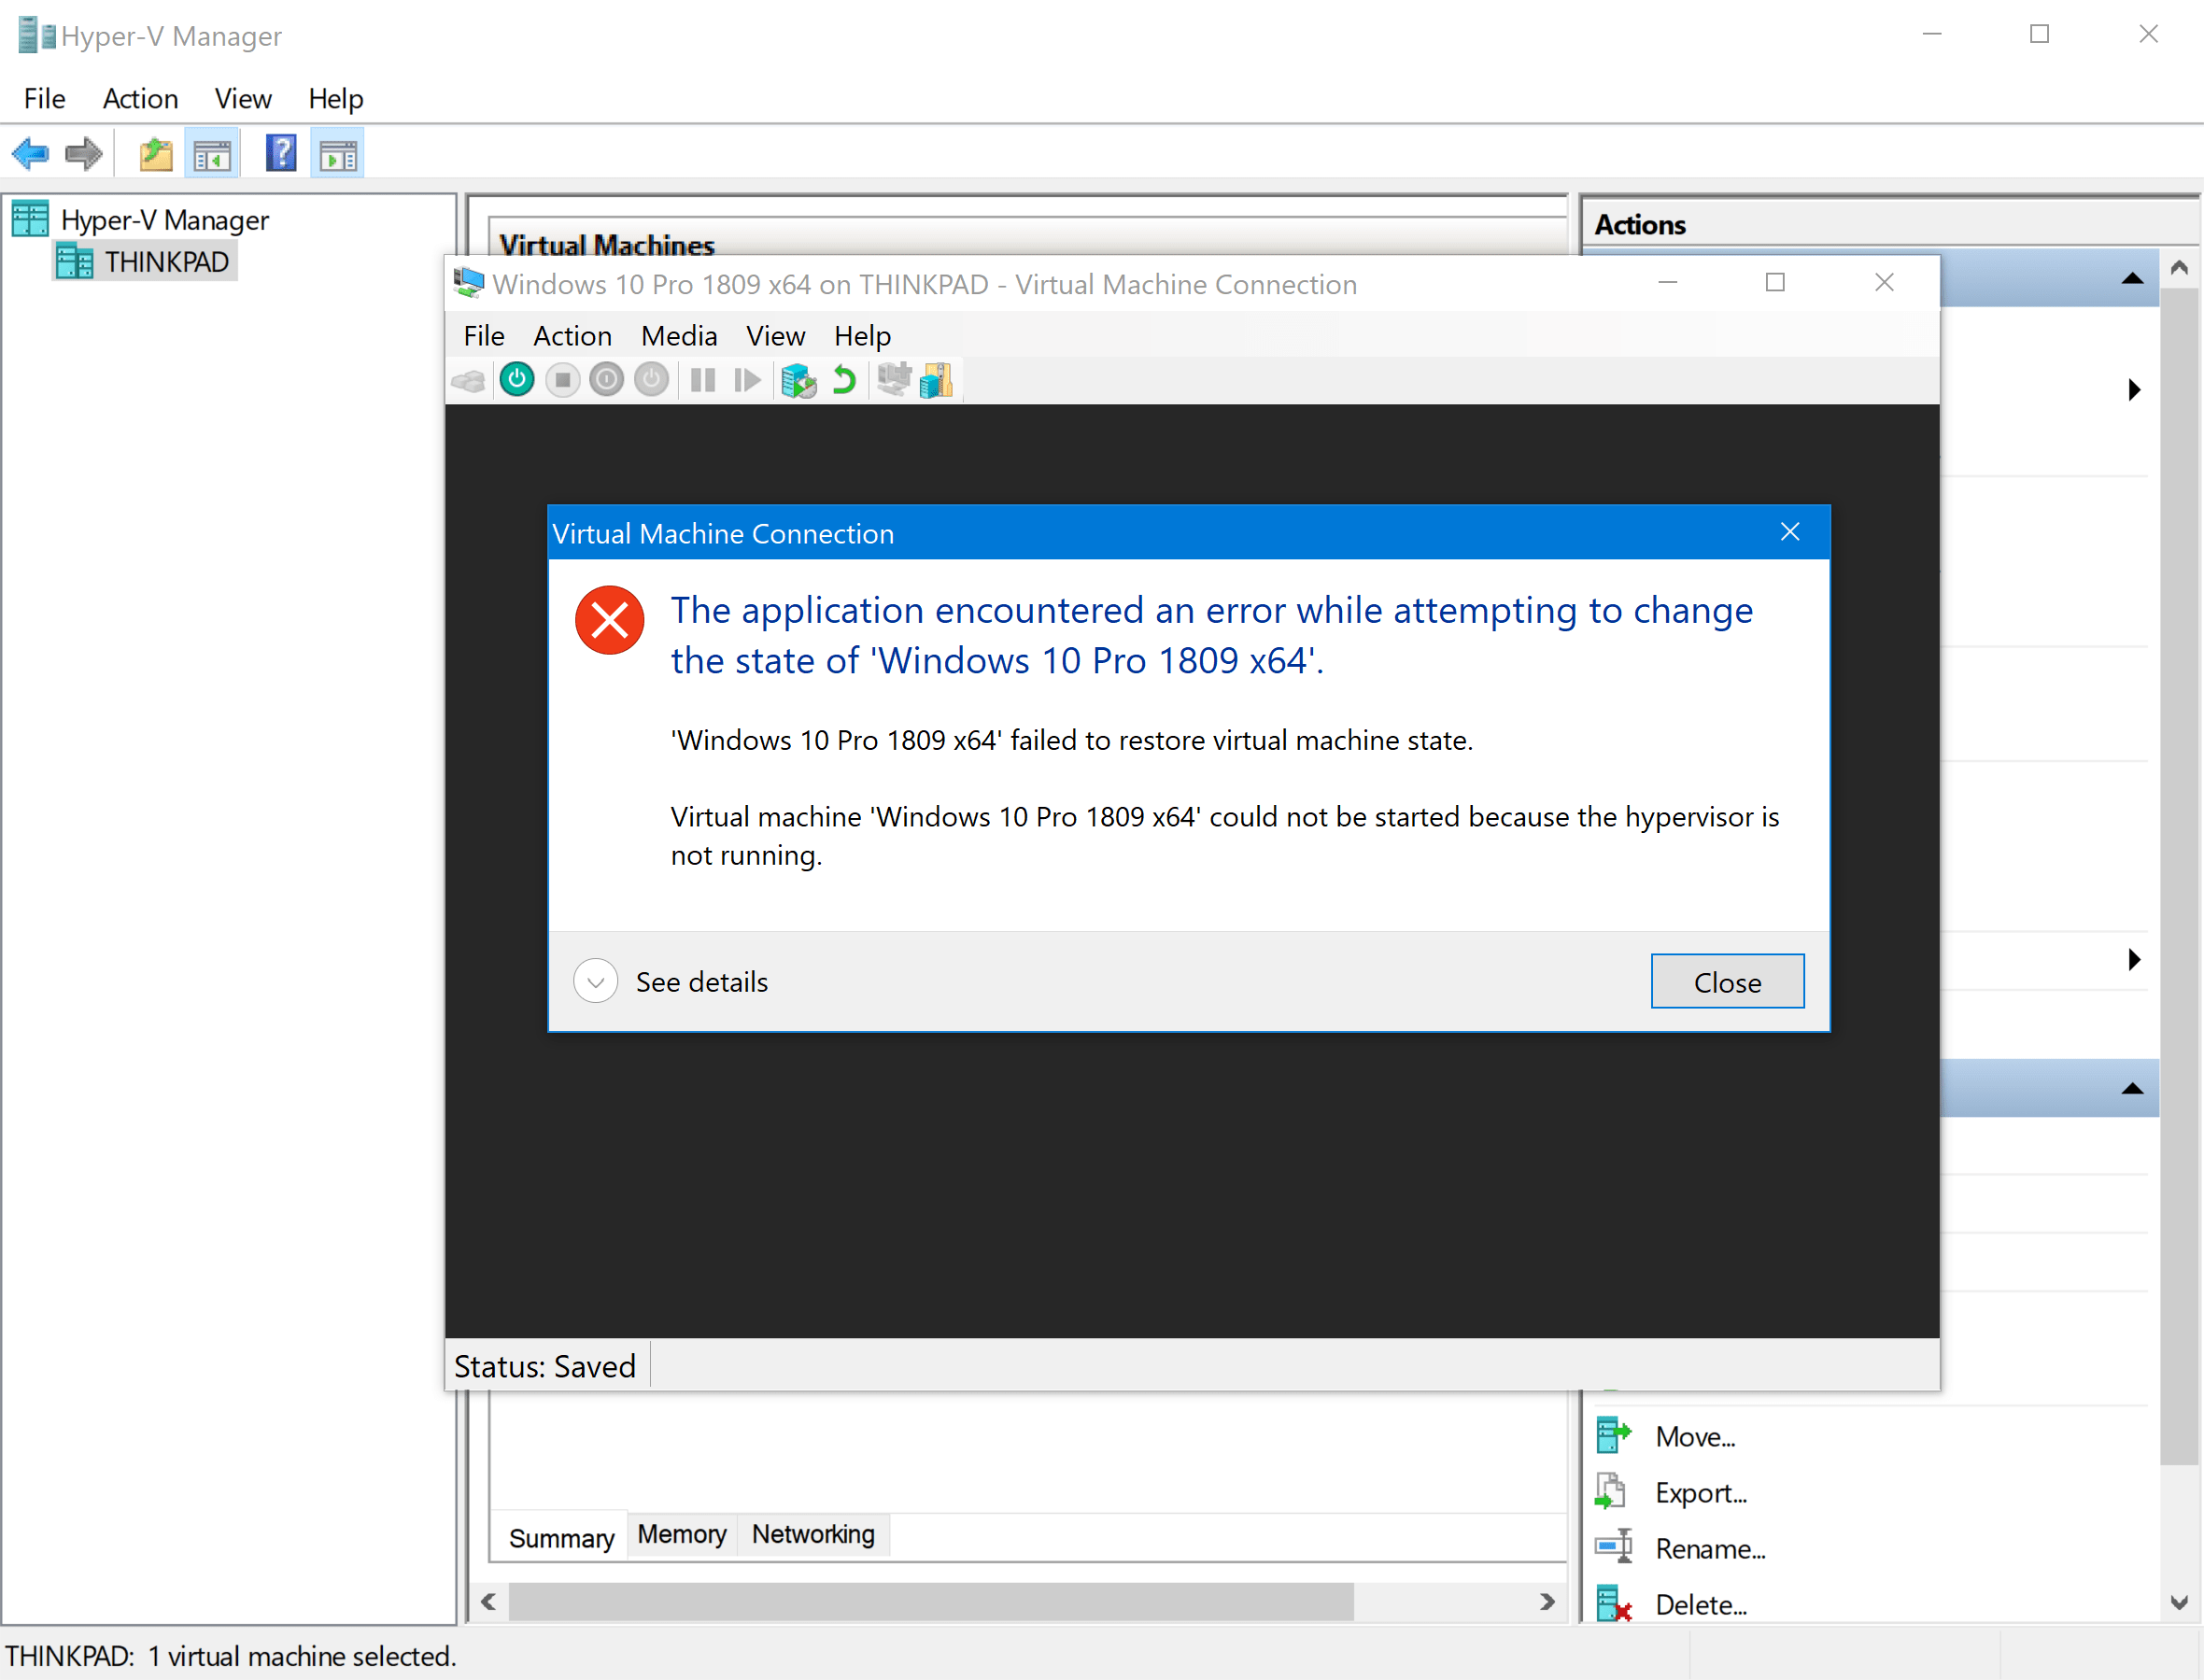 This error message is expected and will always appear until the system is restarted.